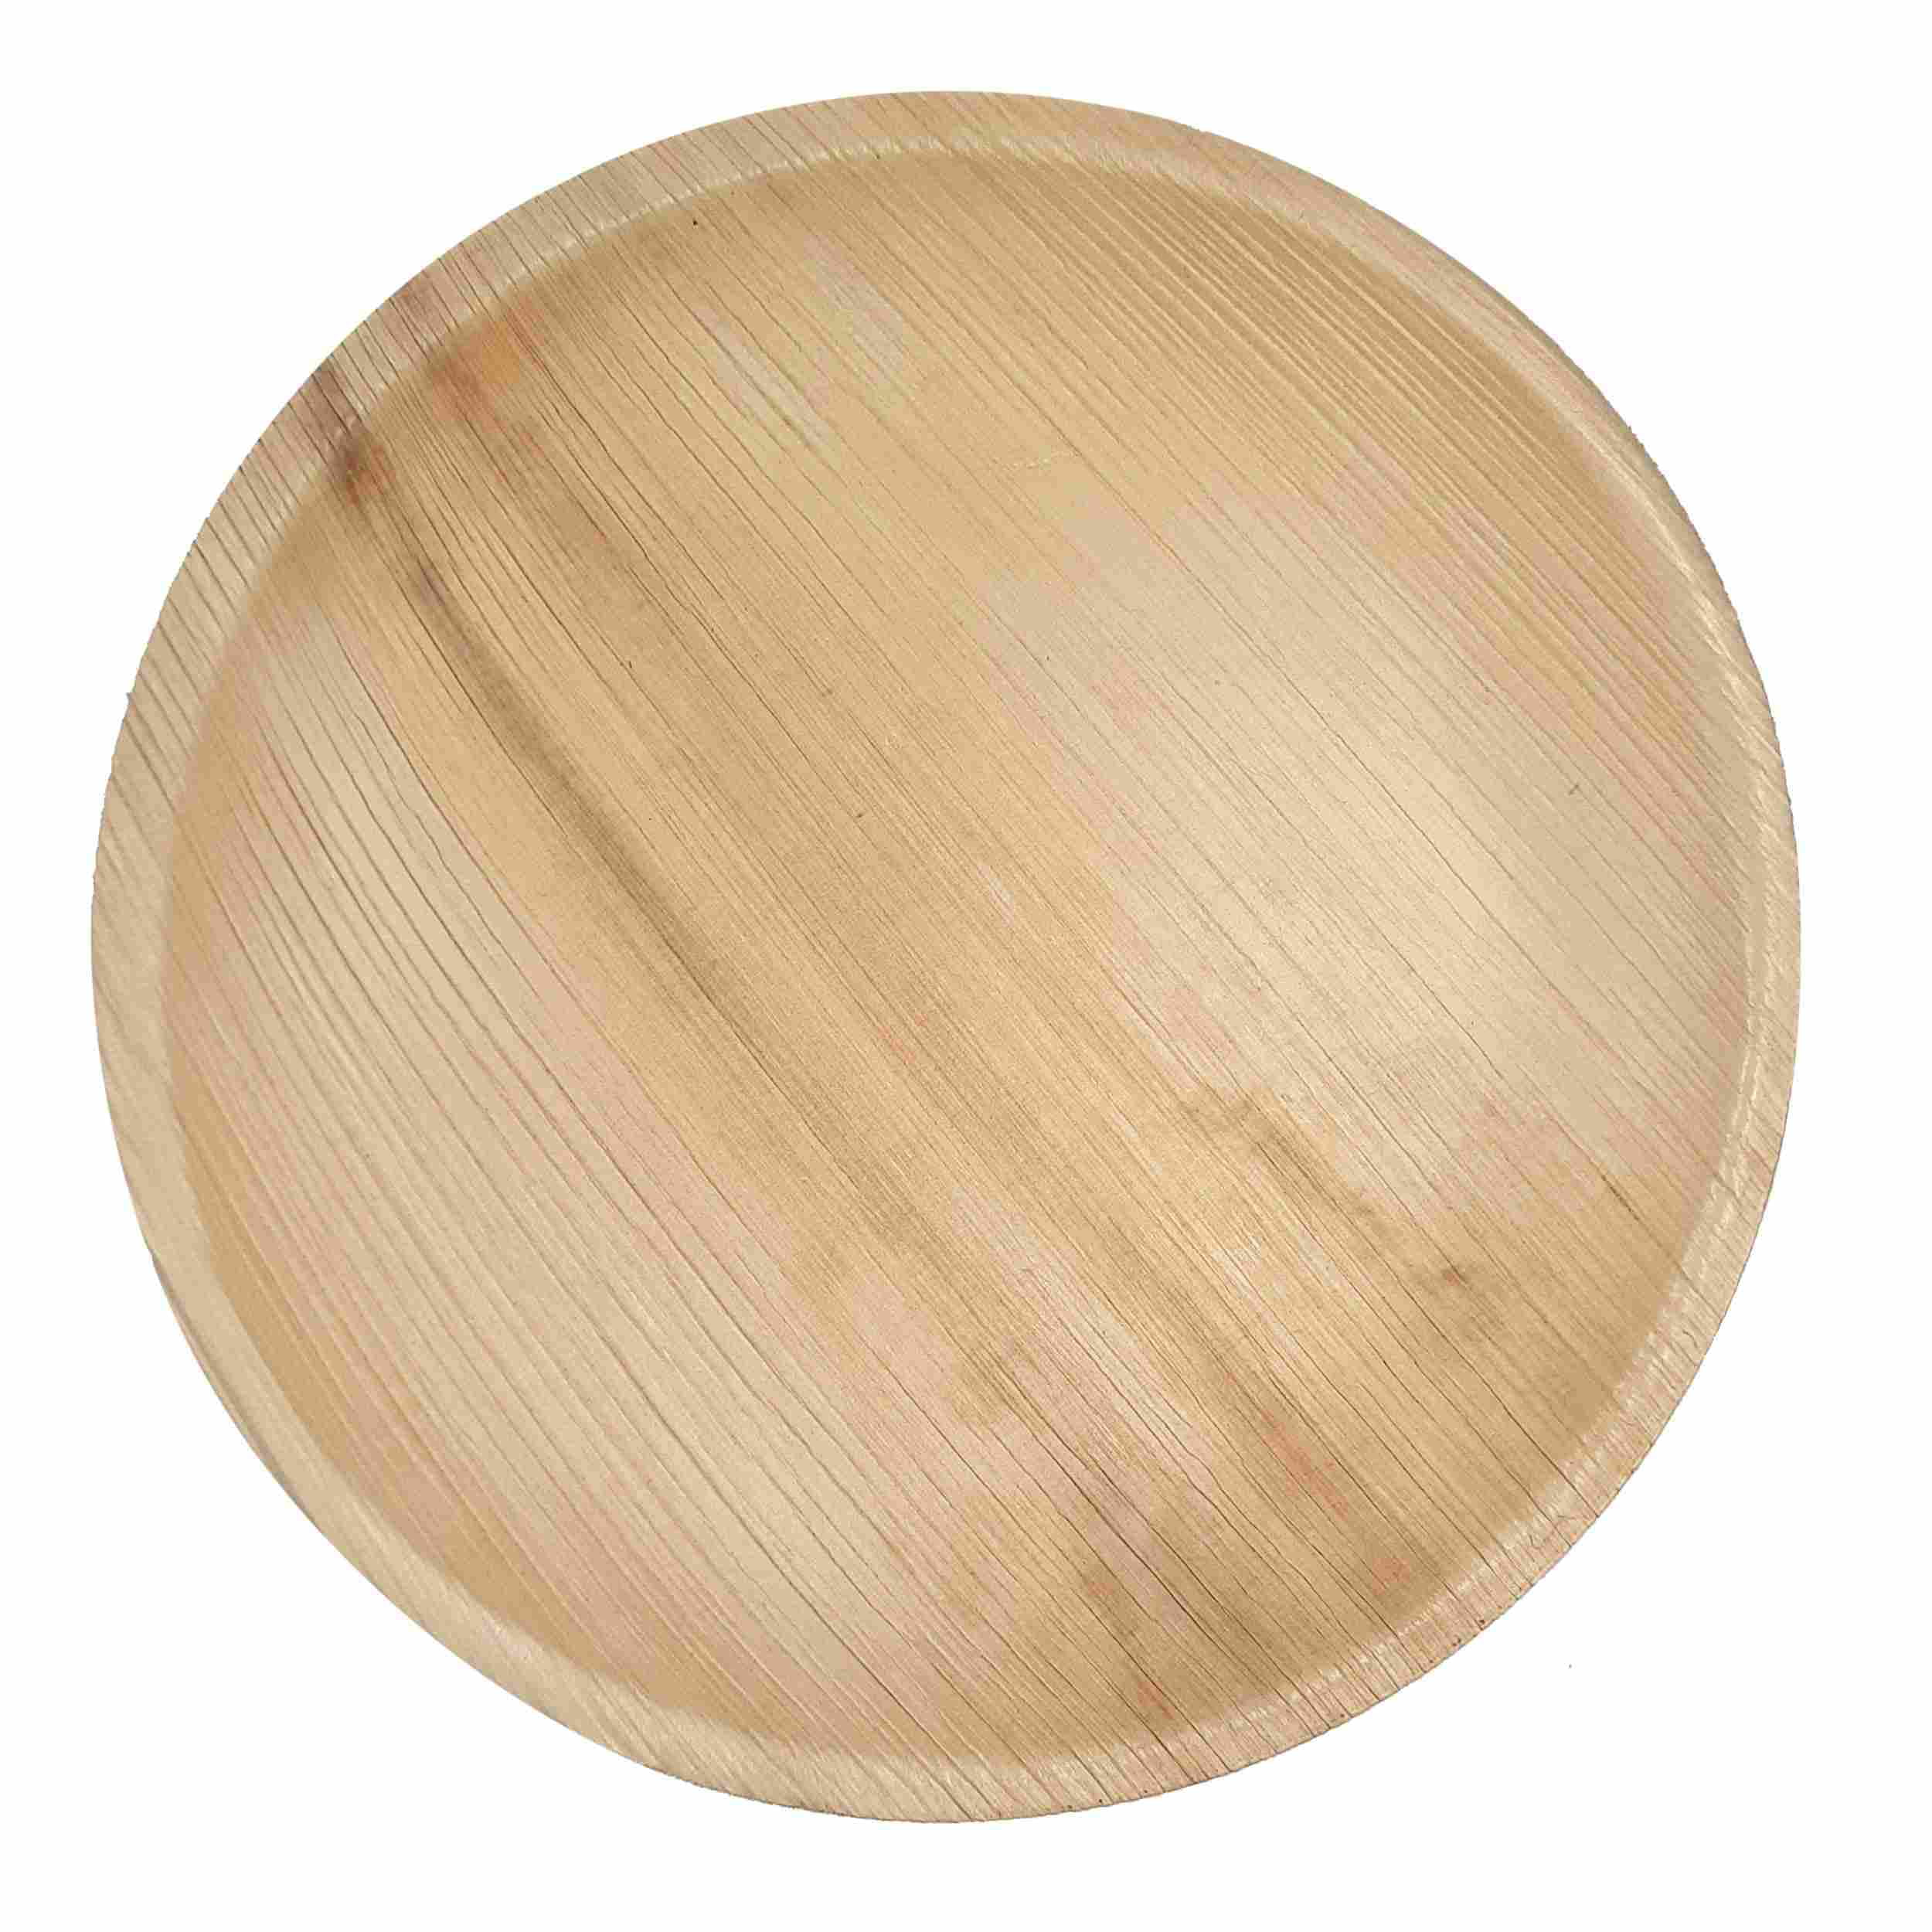 6 Shallow Palm Leaf Plates 50 Pcs Natural Compostable Disposable Plate Pack For Camping Eco-friendly Parties. Wedding